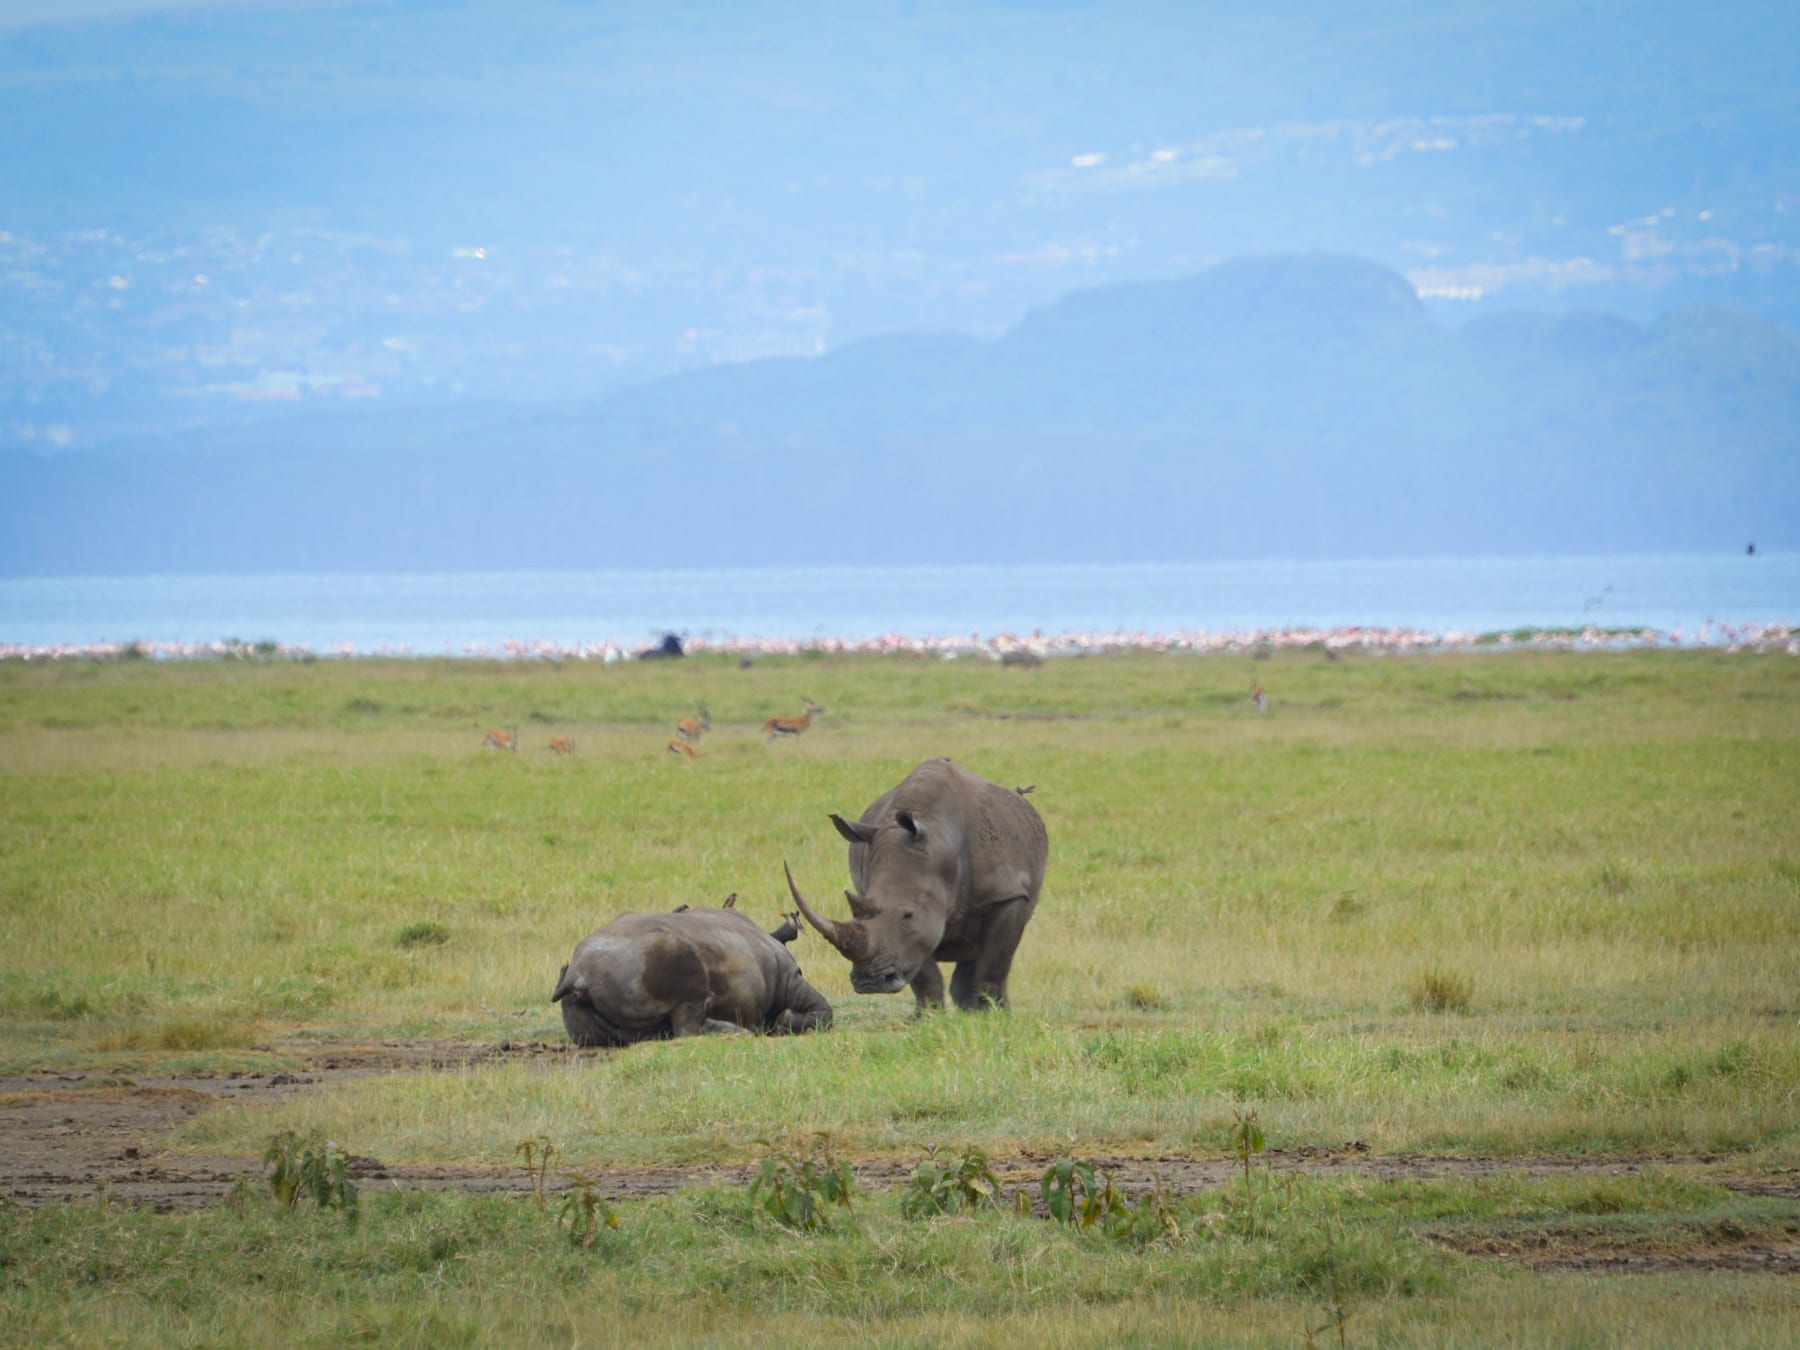 Viewing the big five in the wild is a privilege. We spotted these two rhino at Lake Nakuru.